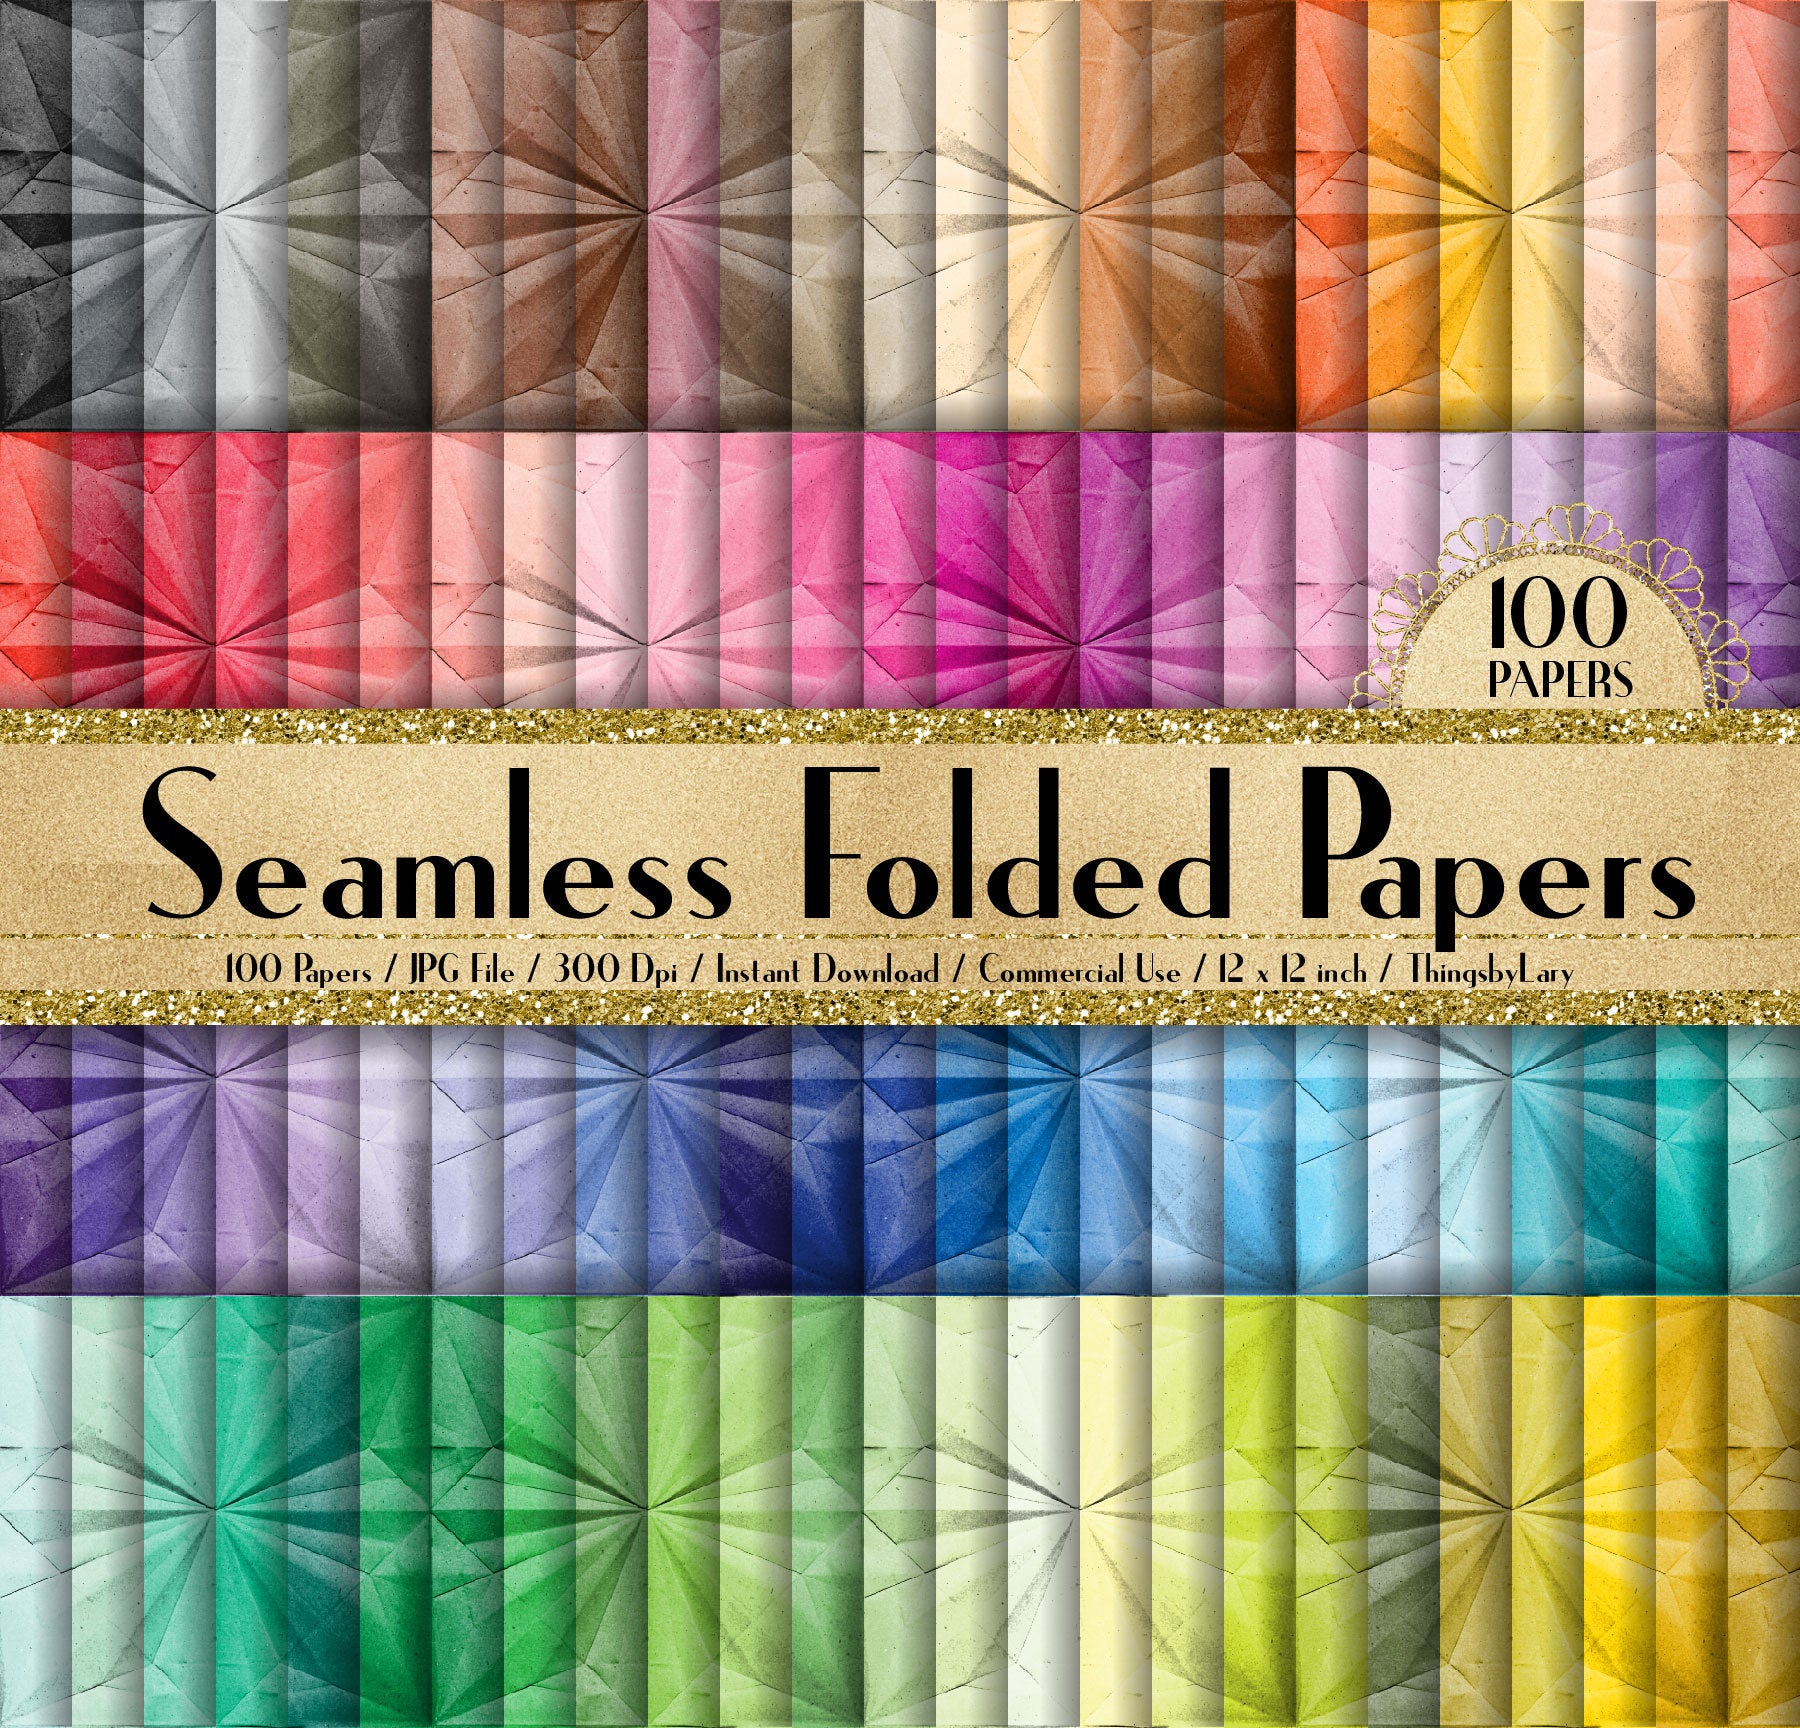 100 Seamless Folded Papers 12 inch 300 Dpi Instant Download Commercial Use, Planner Paper, Scrapbooking Craft origami Kit, Seamless Papers